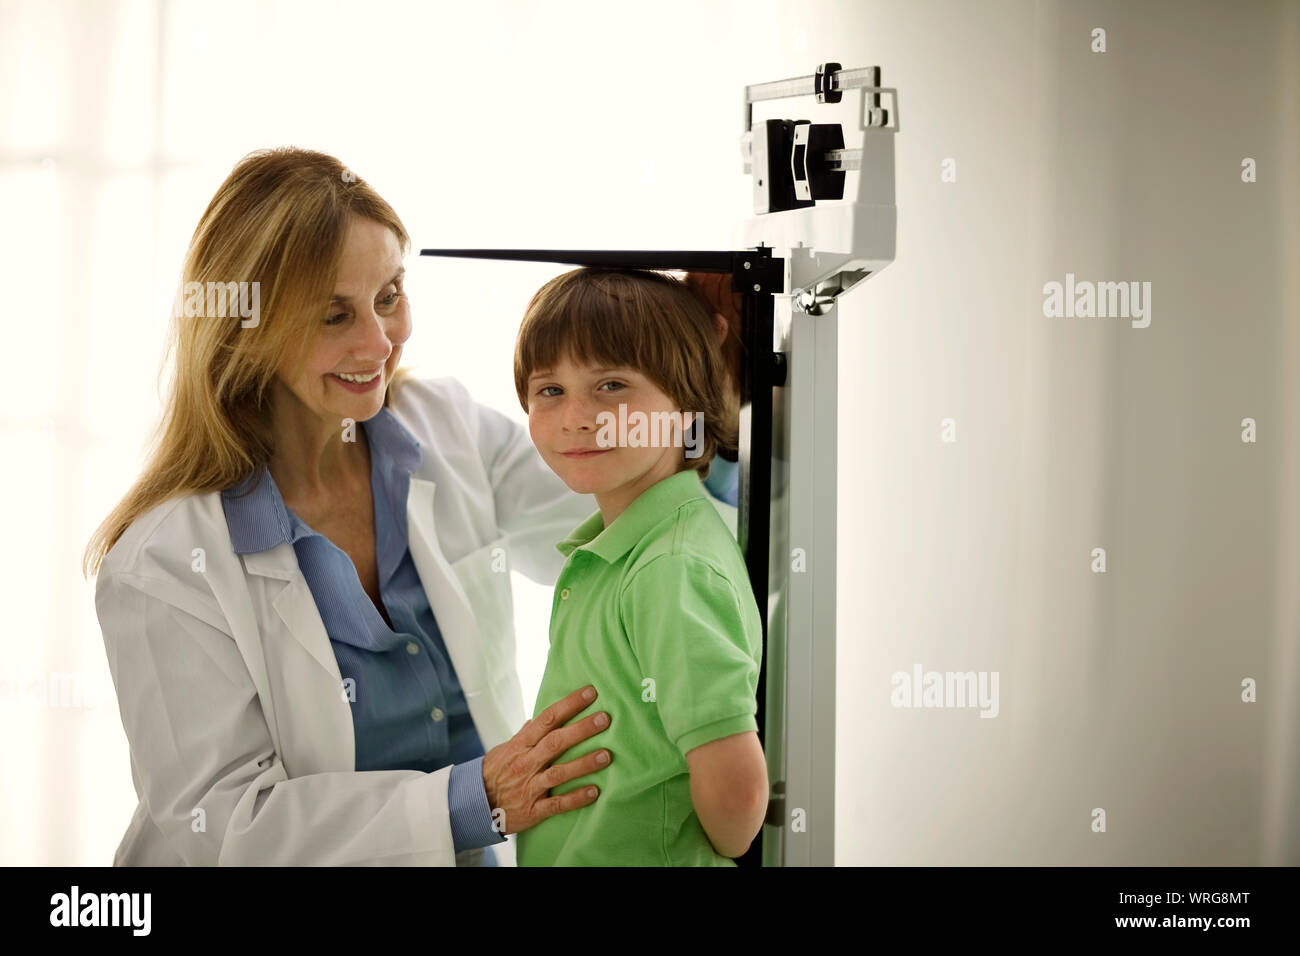 Doctor measuring a young boy's height. Stock Photo